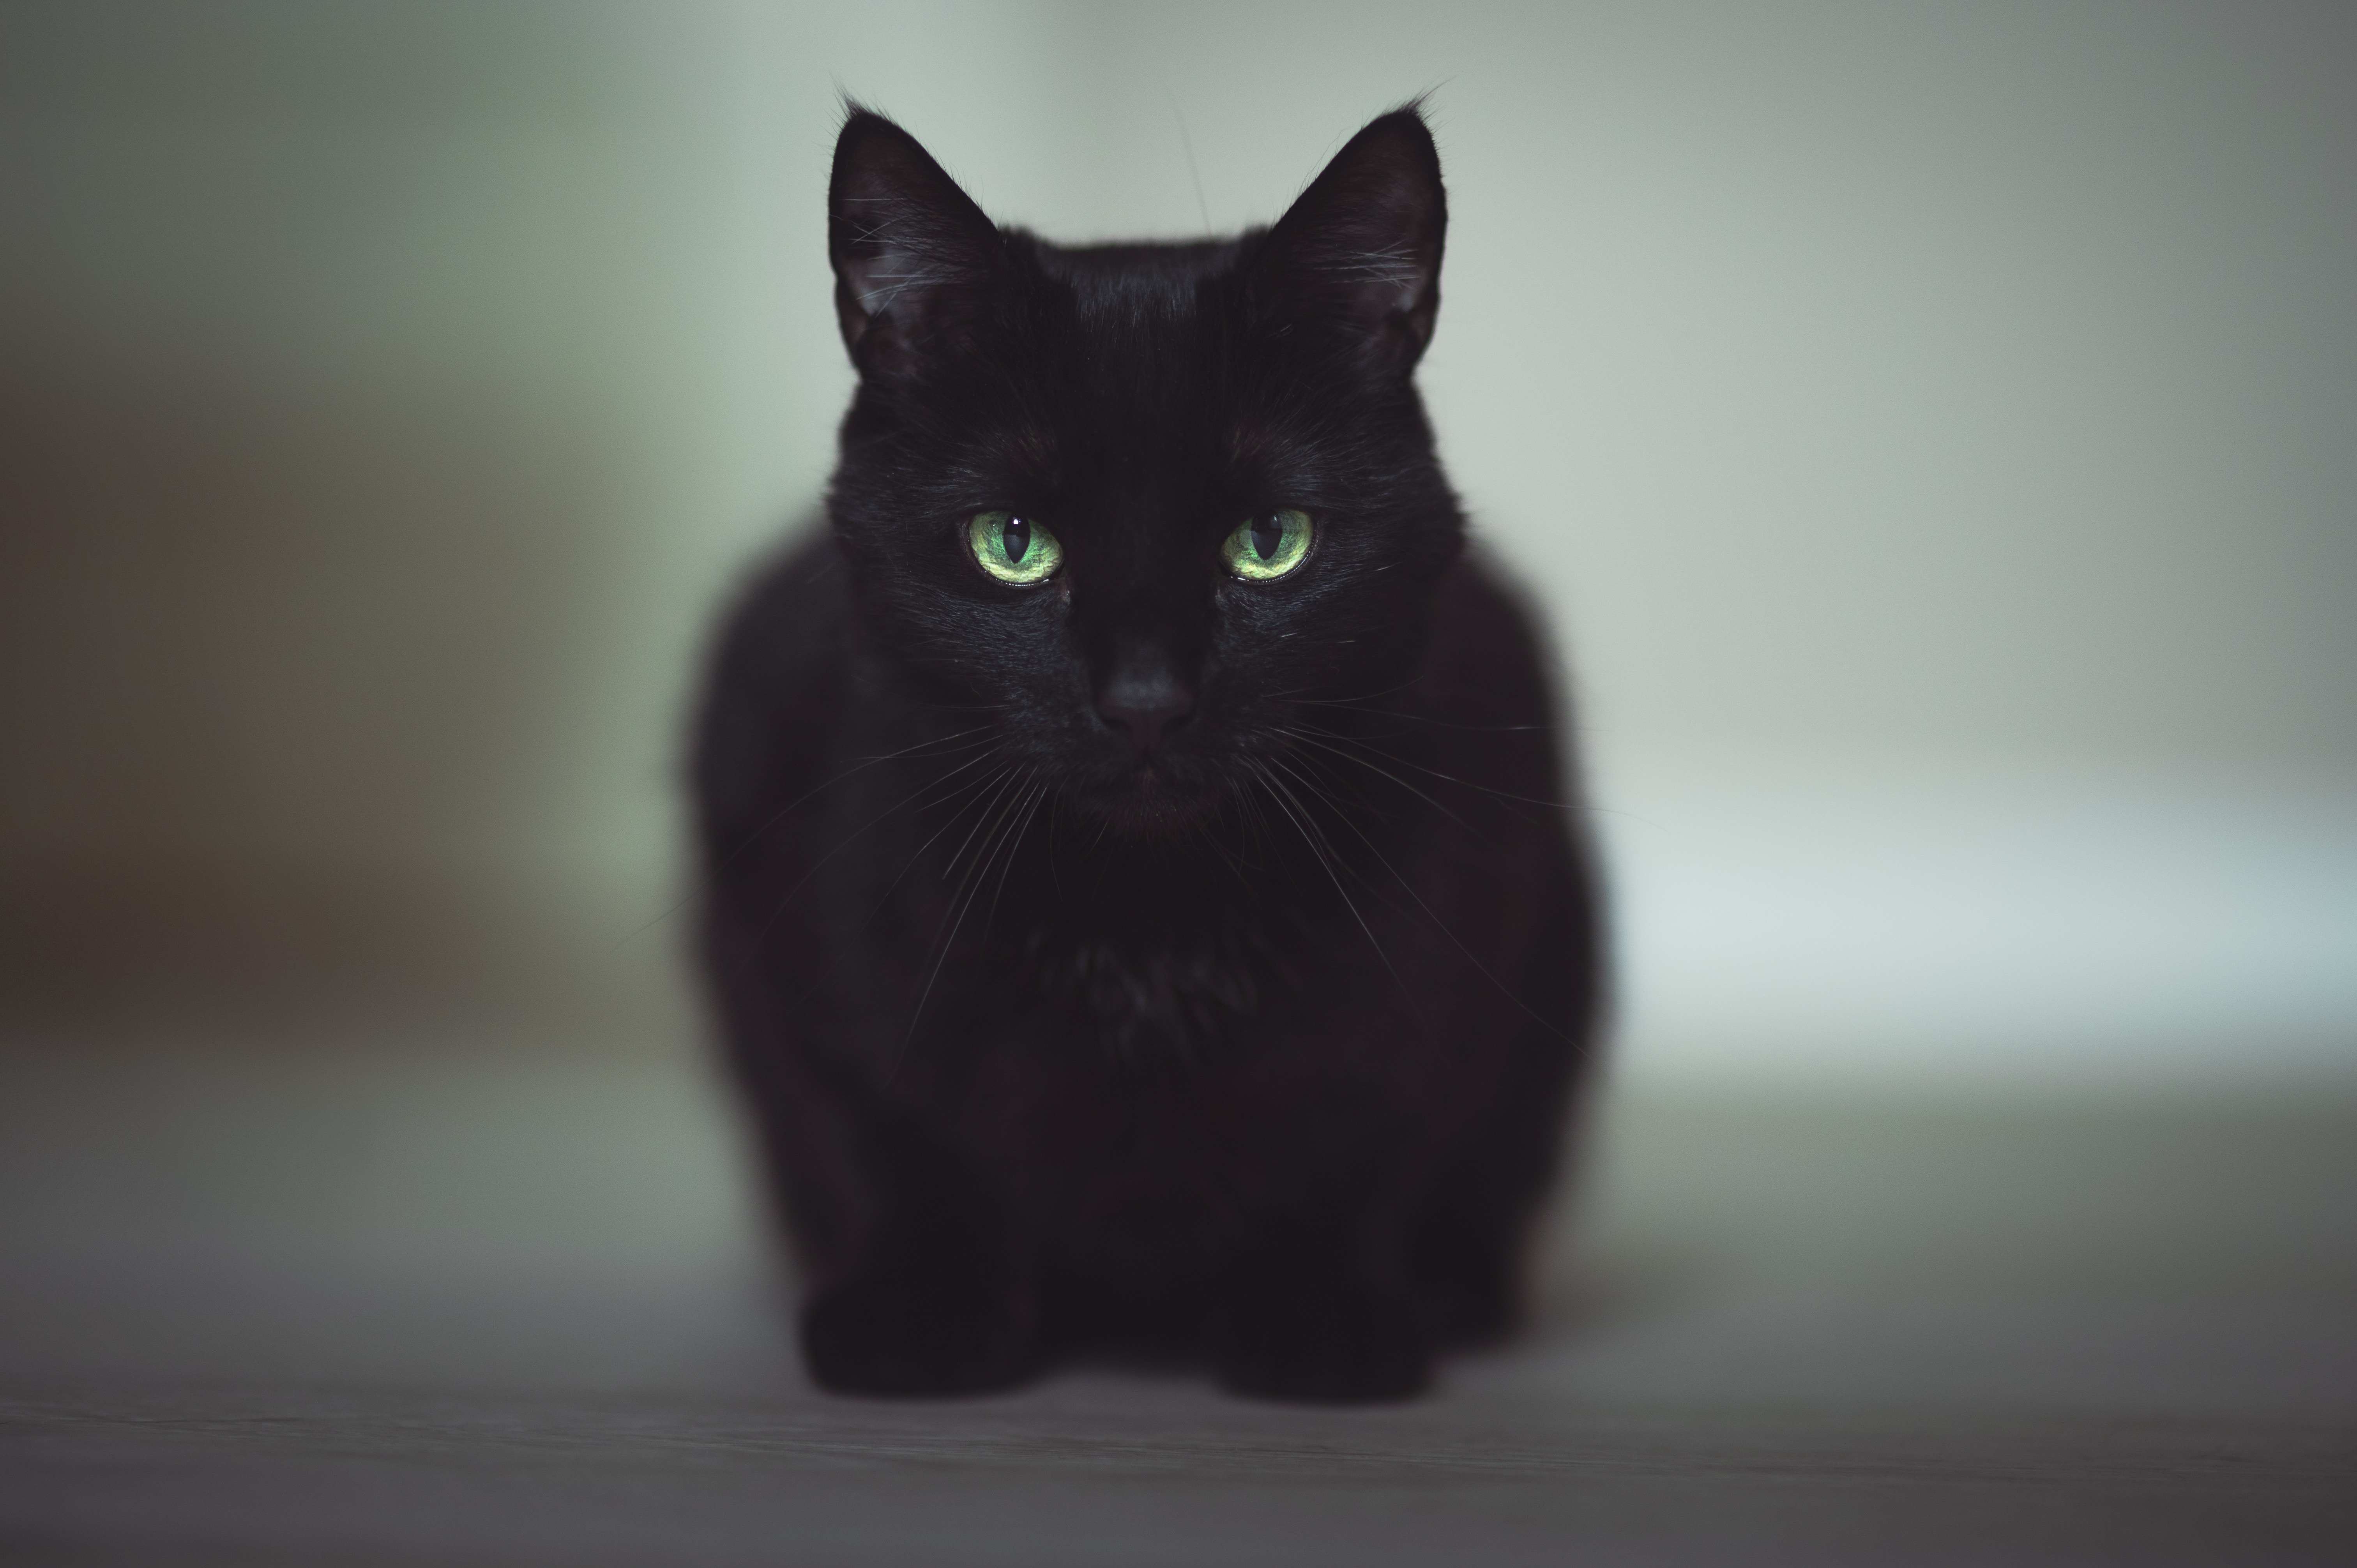 145 Black Cat Names for Males and Females - Good Names for Black Cats